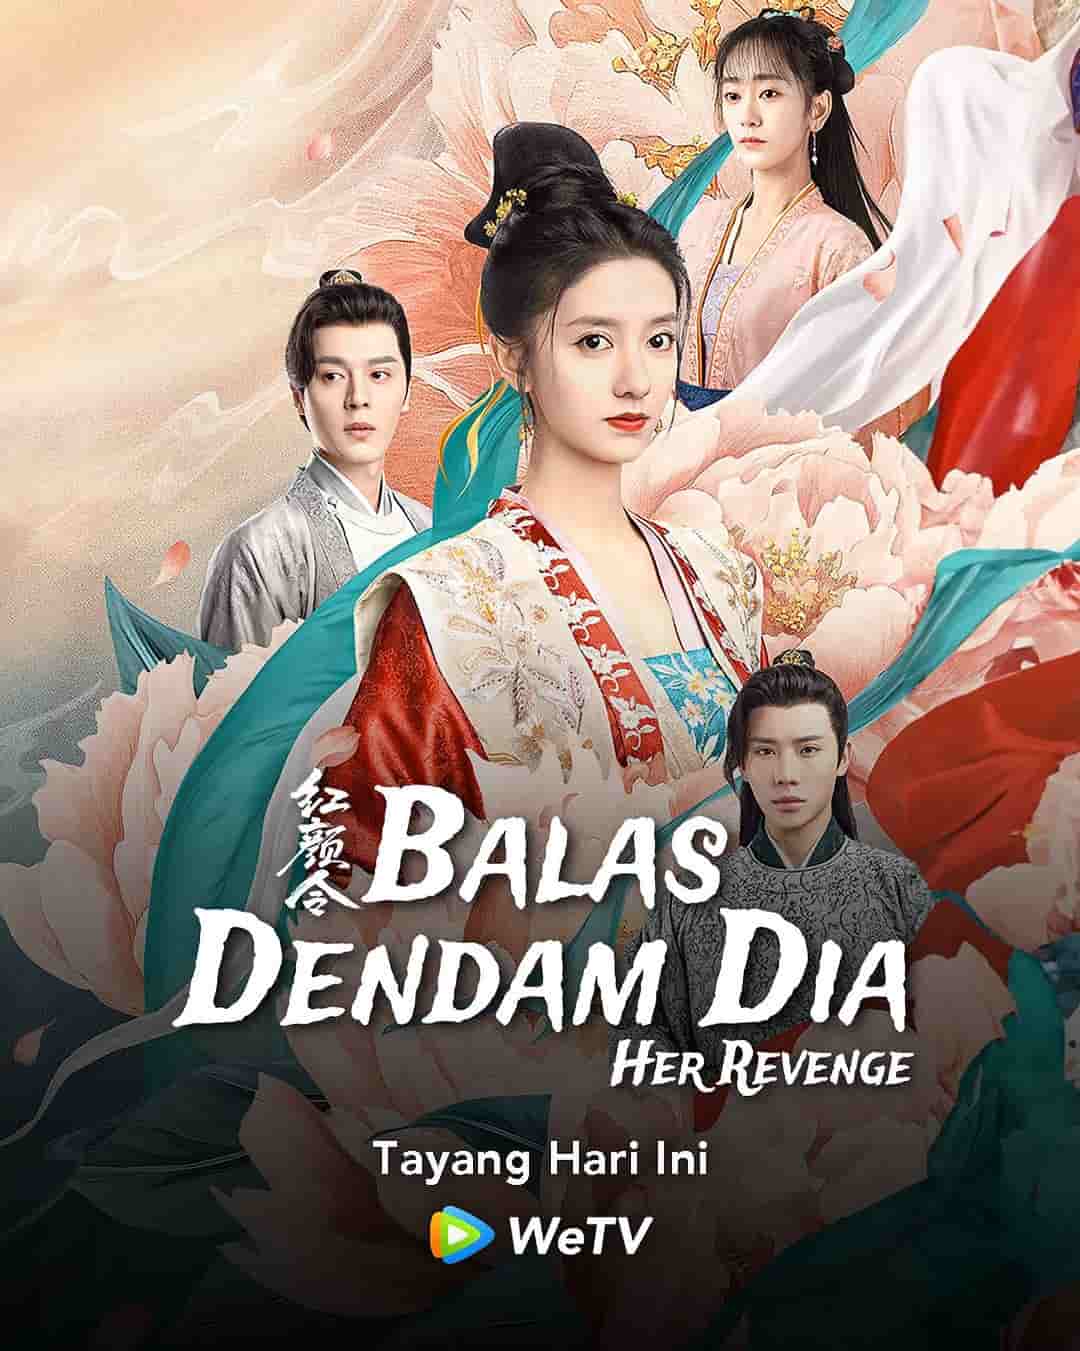 Her Revenge - Sinopsis, Pemain, OST, Episode, Review